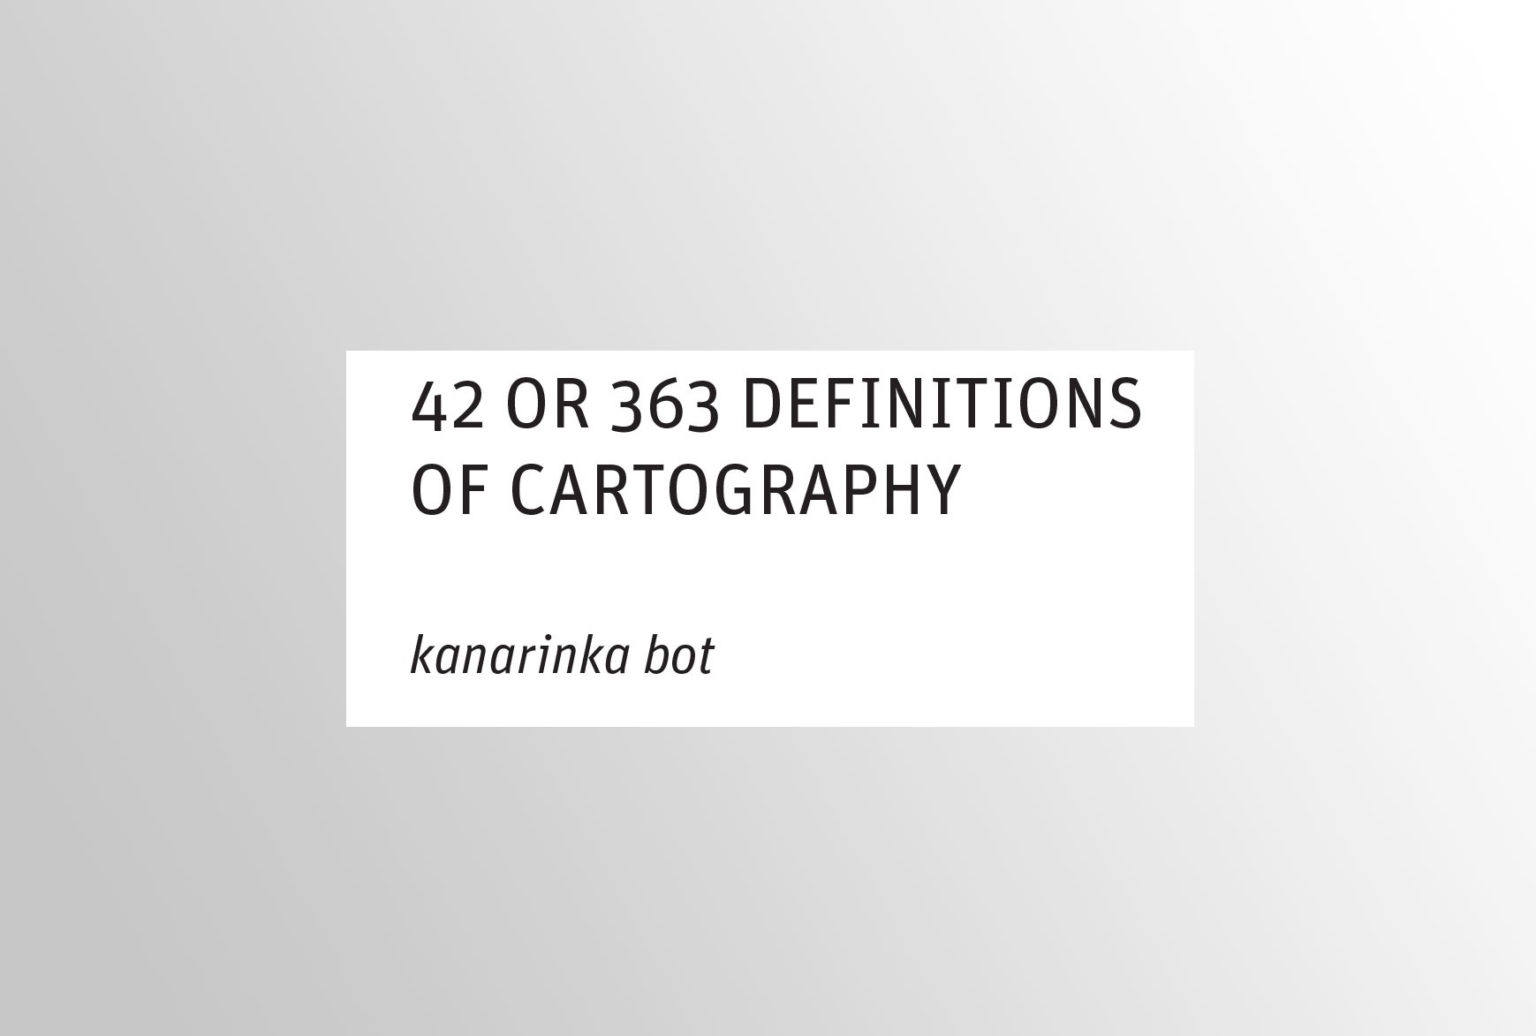 42-or-363-definitions-of-cartography-geoactivismo